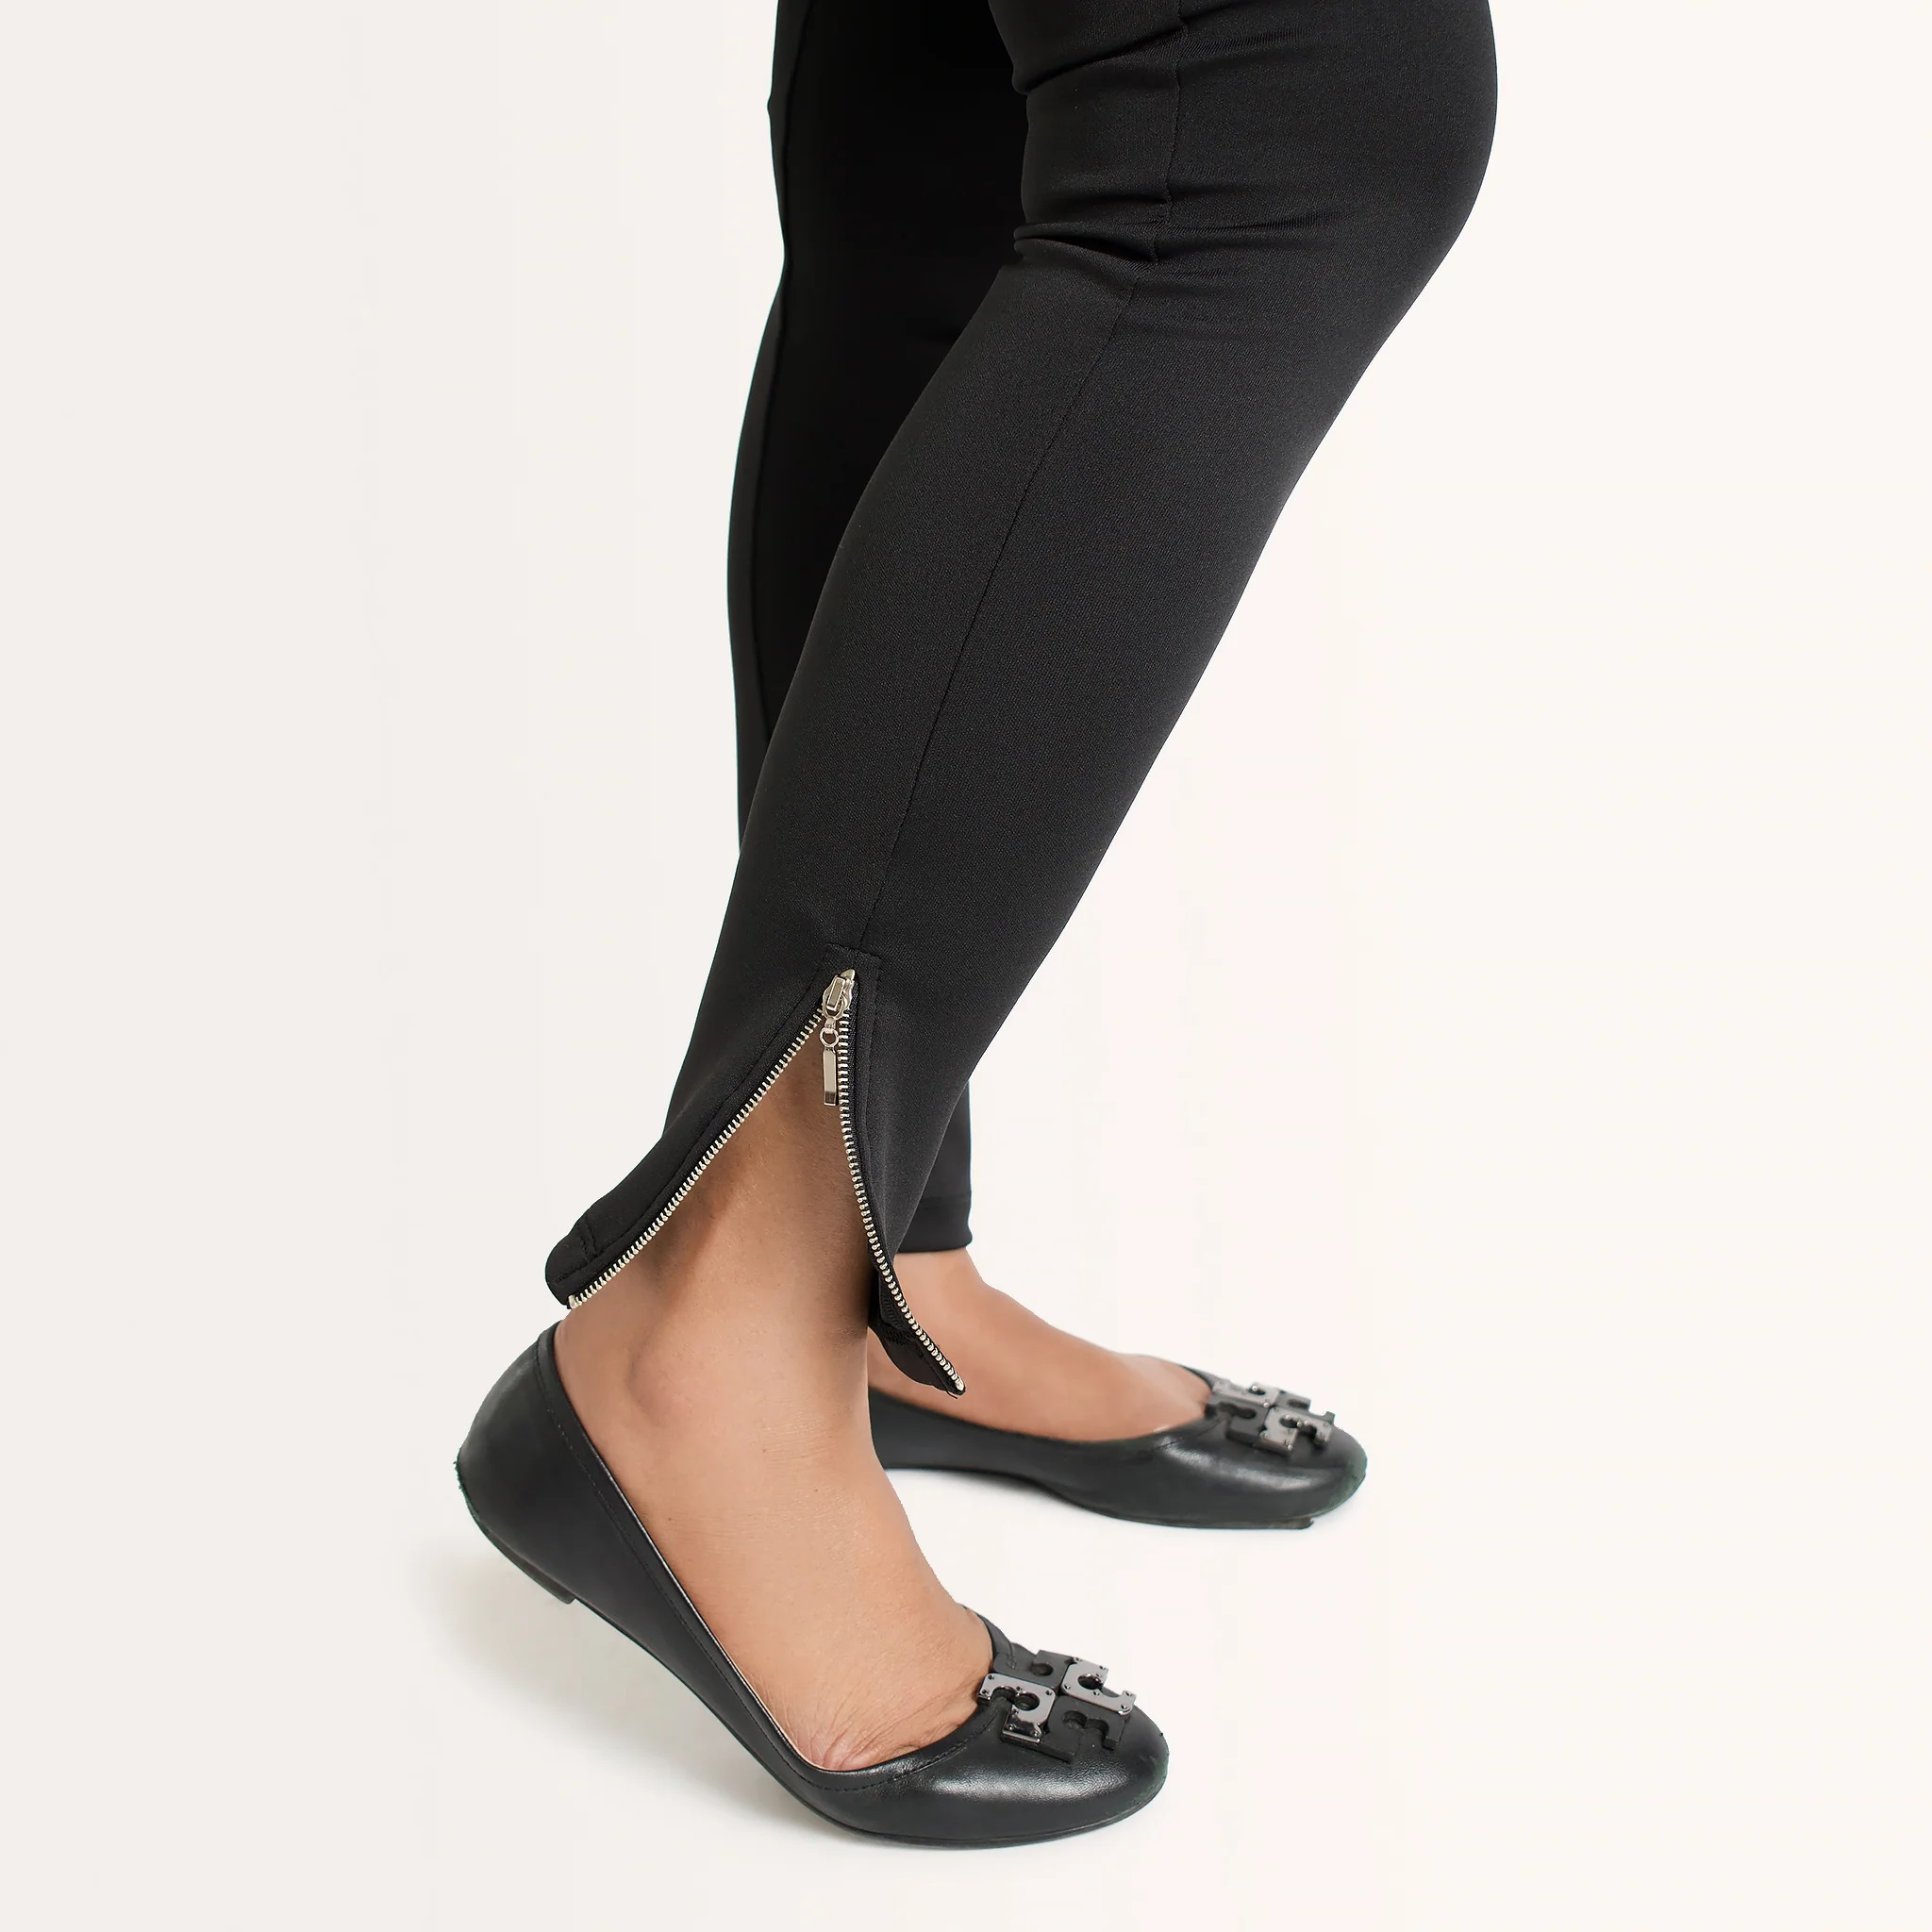 Ballet flats with leggings